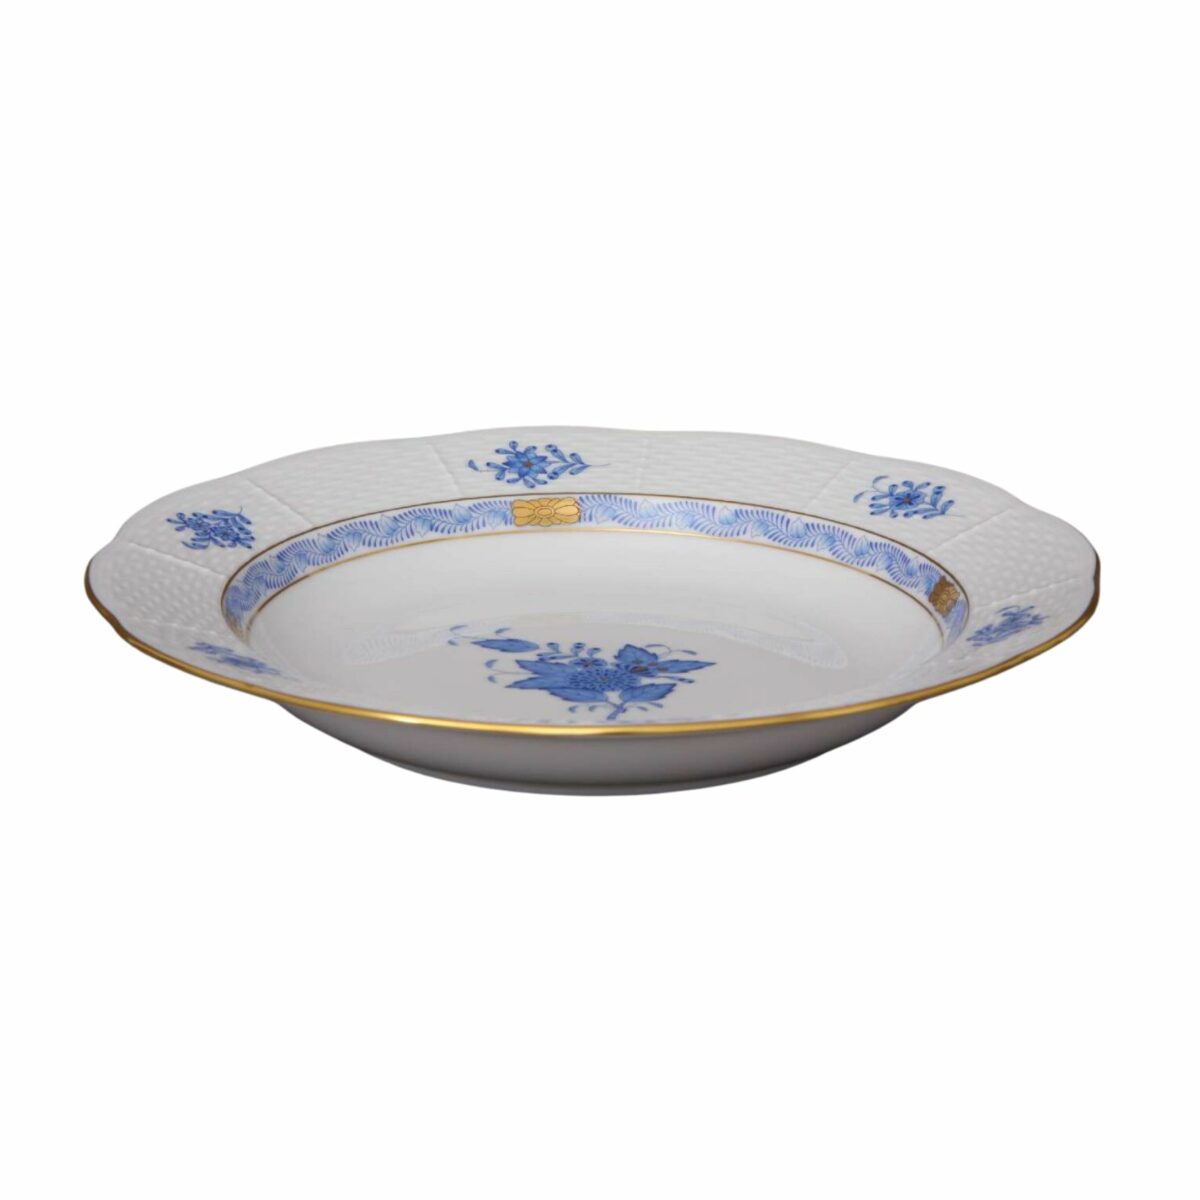 Herend-Porcelain-Chinese-Bouquet-Blue-00503-0-00-AB